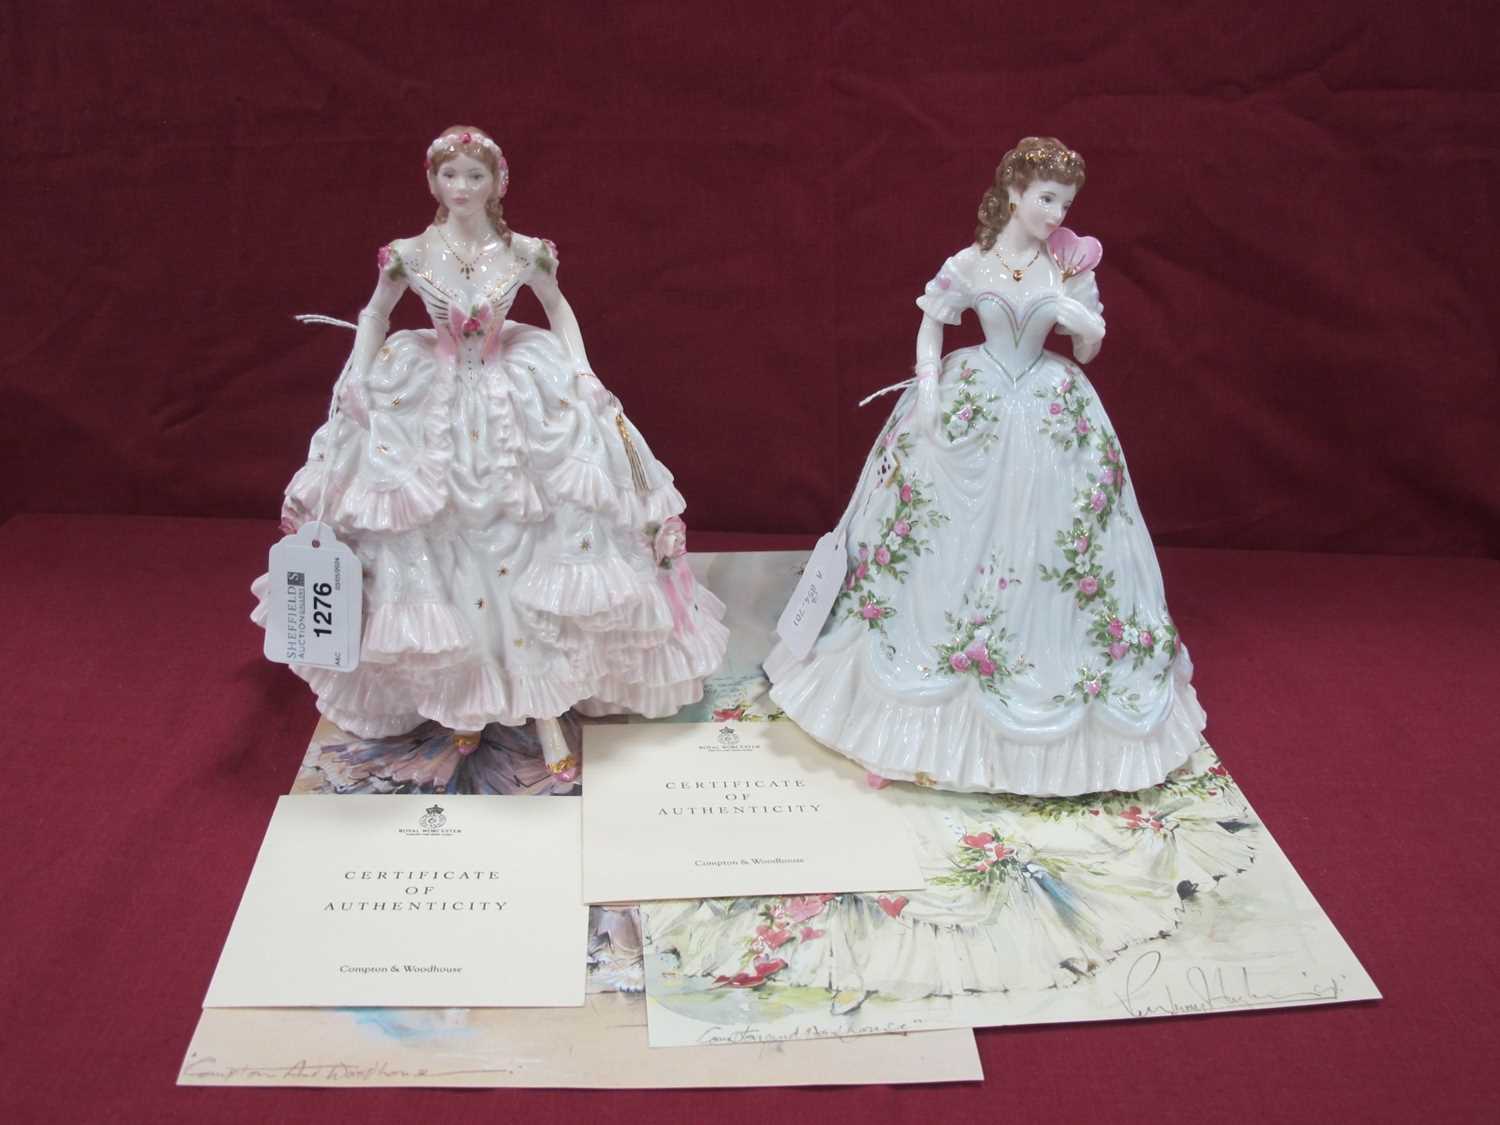 Royal Worcester Figurines 'Royal Debut' and 'Queen of Hearts', each limited edition of 12,500 for